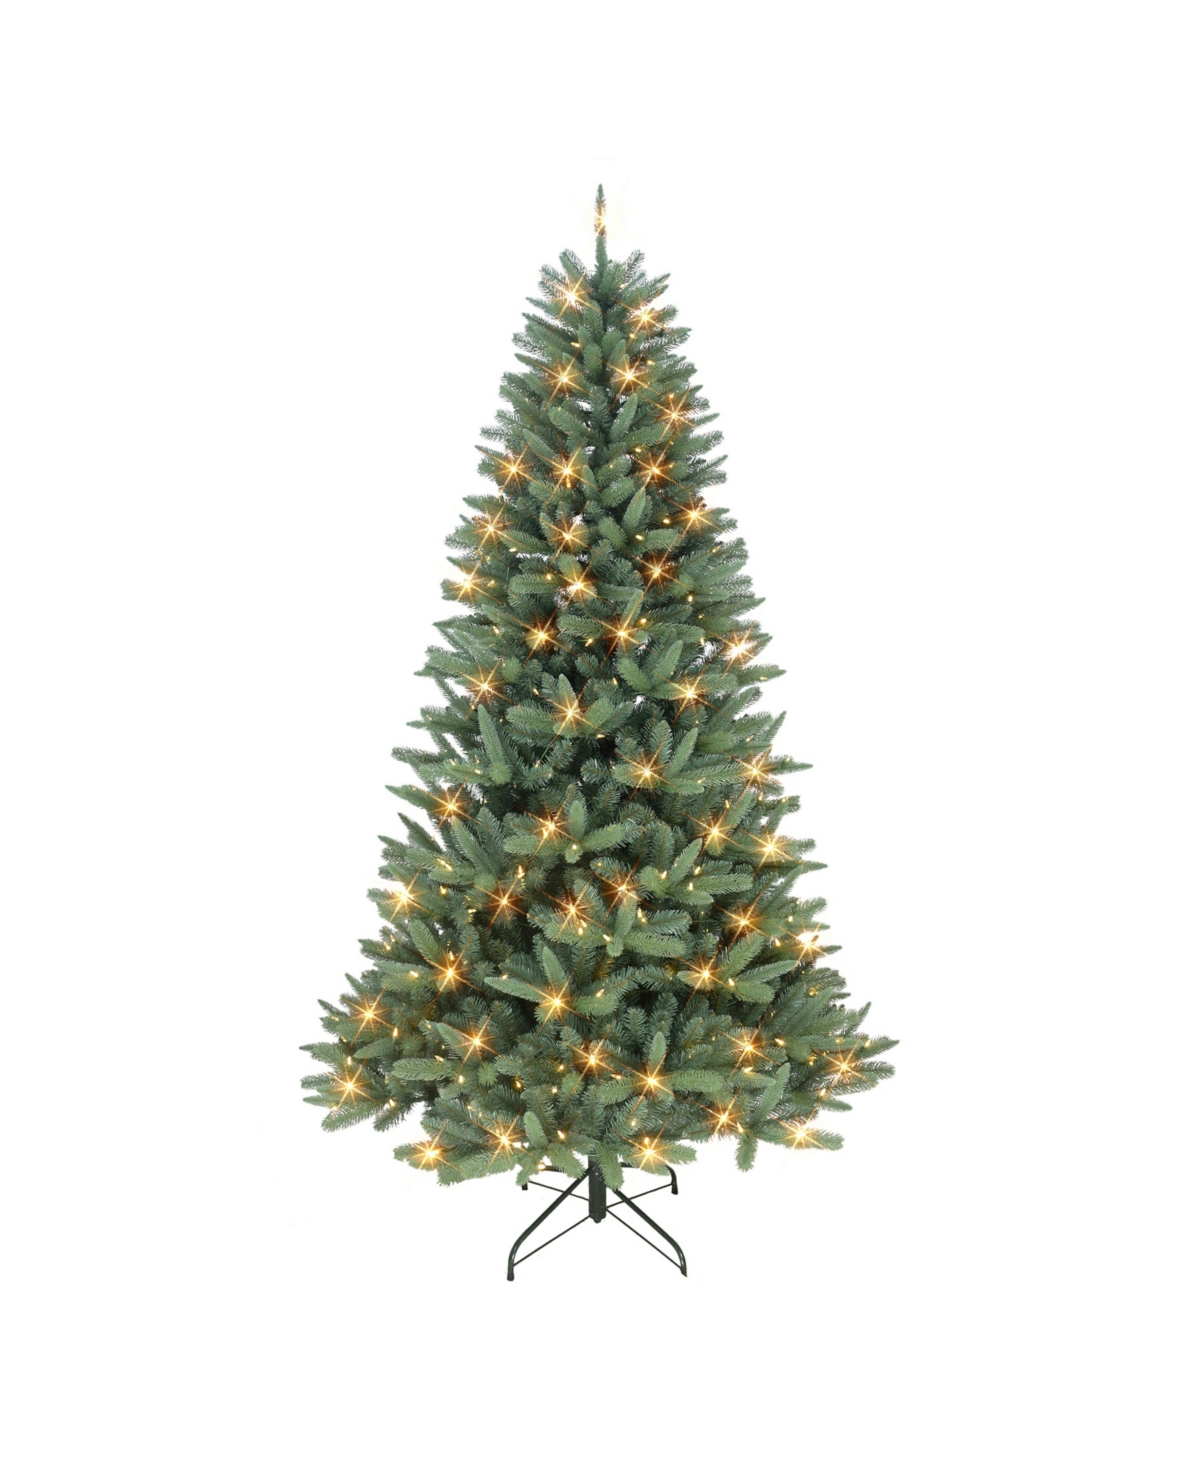 Puleo 7.5' Pre-lit Monterey Spruce Tree With 500 Warm White Led Lights, 1527 Tips In Green